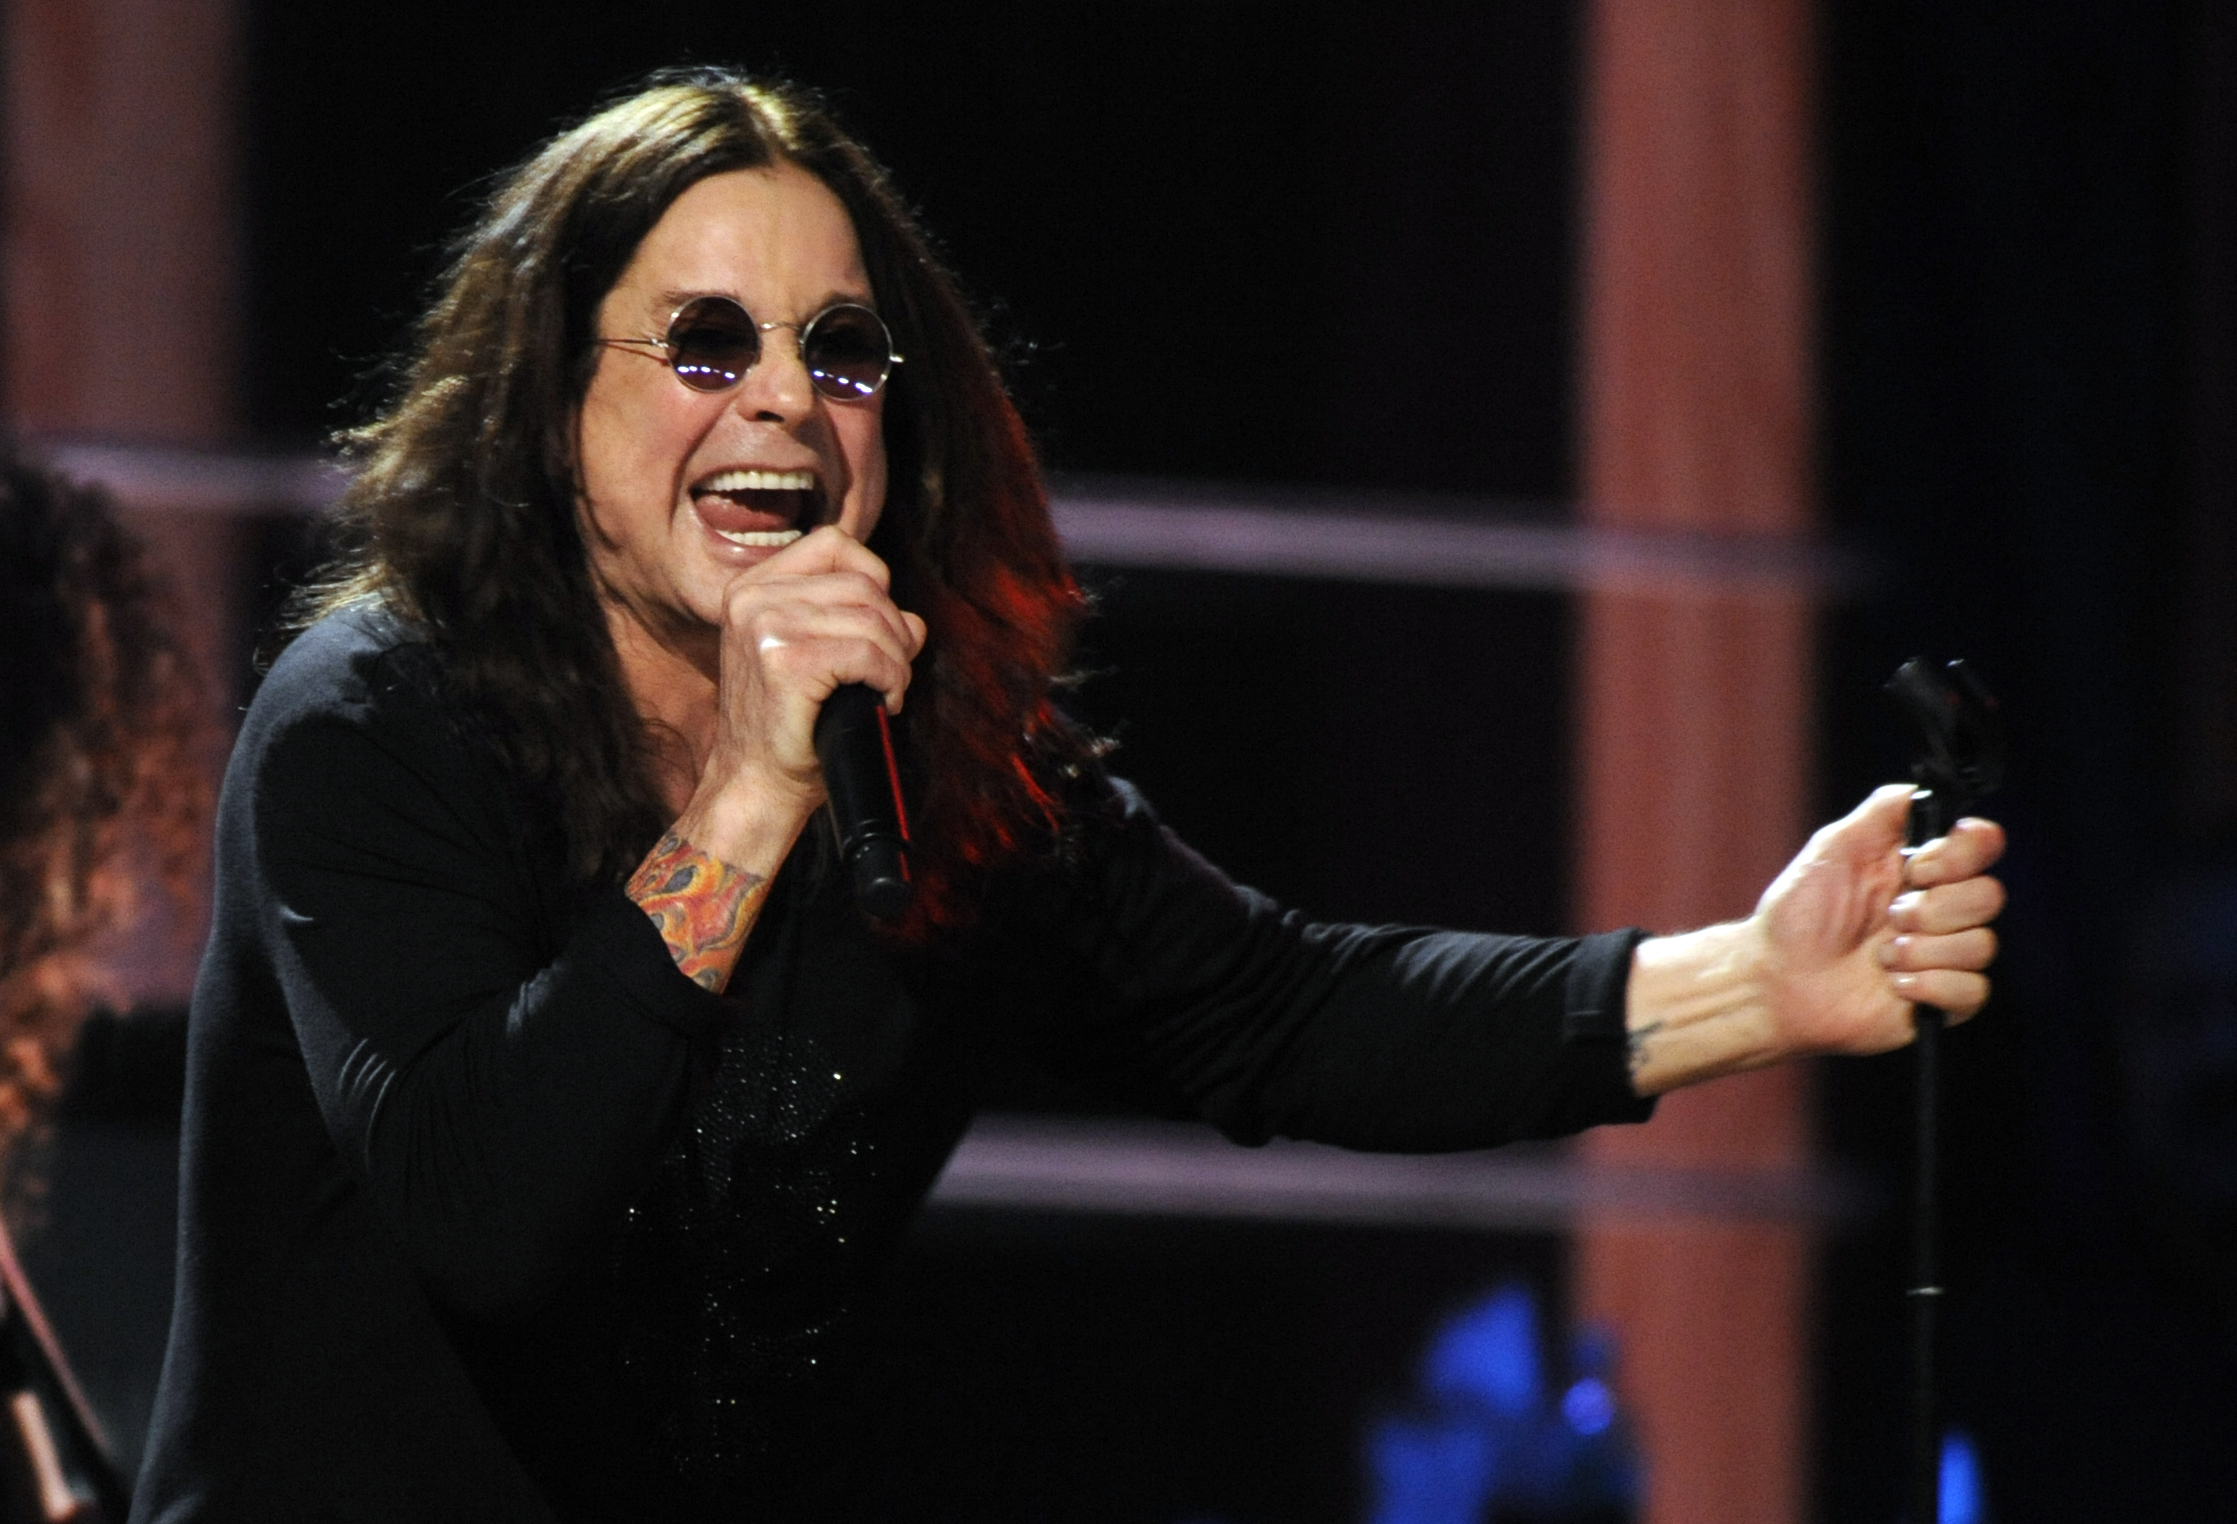 Ozzy Osbourne performs with Metallica at the 25th Anniversary Rock & Roll Hall of Fame concert at Madison Square Garden, Friday, Oct. 30, 2009 in New York. (AP Photo/Henny Ray Abrams)